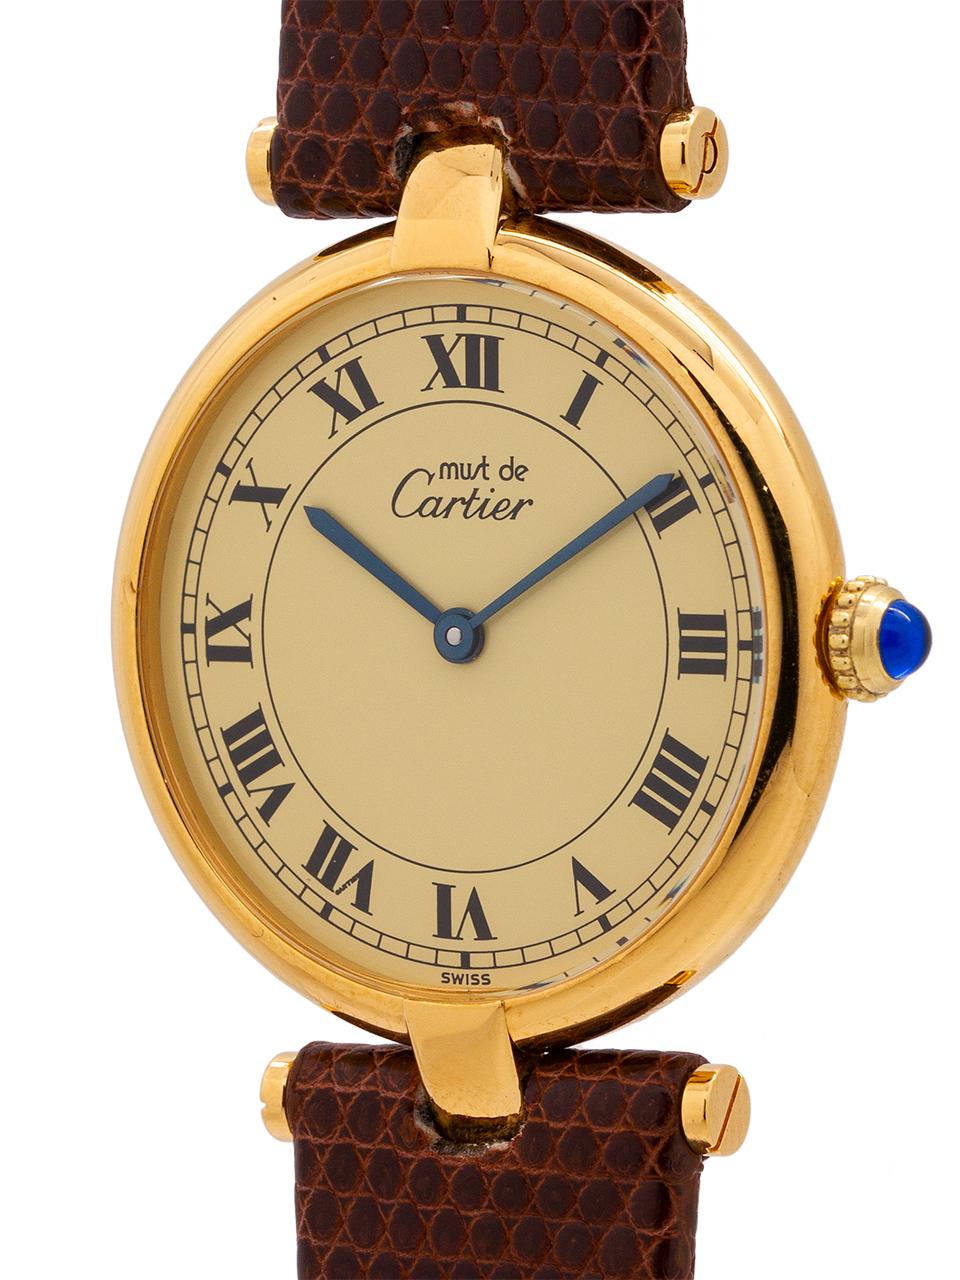 
Cartier man’s vermeil Vendome Tank wristwatch circa 1990s. Case mesuring 30.5 x 37mm with T-bar lugs. Featuring an original cream dial with classic printed Cartier Roman numbers with blued steel hands and blue sapphire cabochon crown. Battery